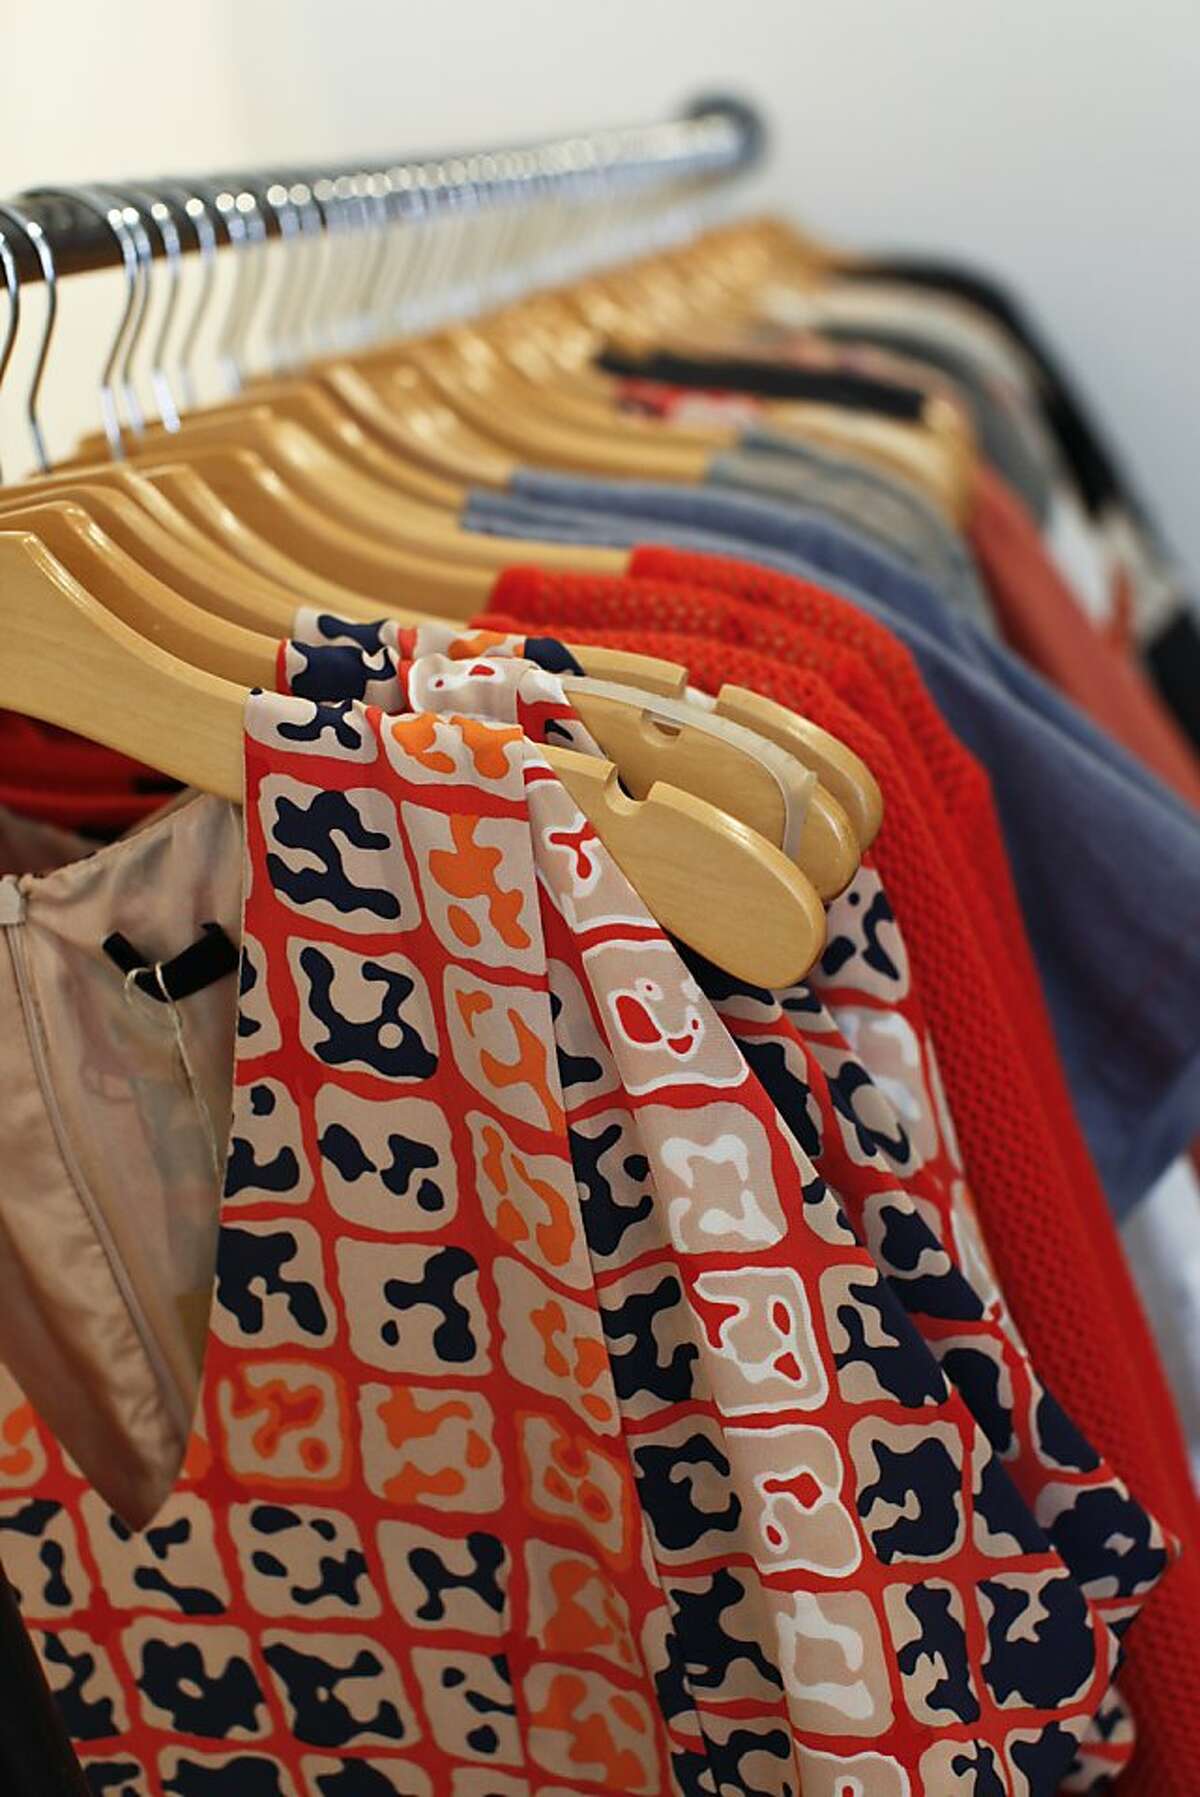 Clothing is seen at Conifer on Wednesday, June 27, 2012 in San Francisco, Calif.